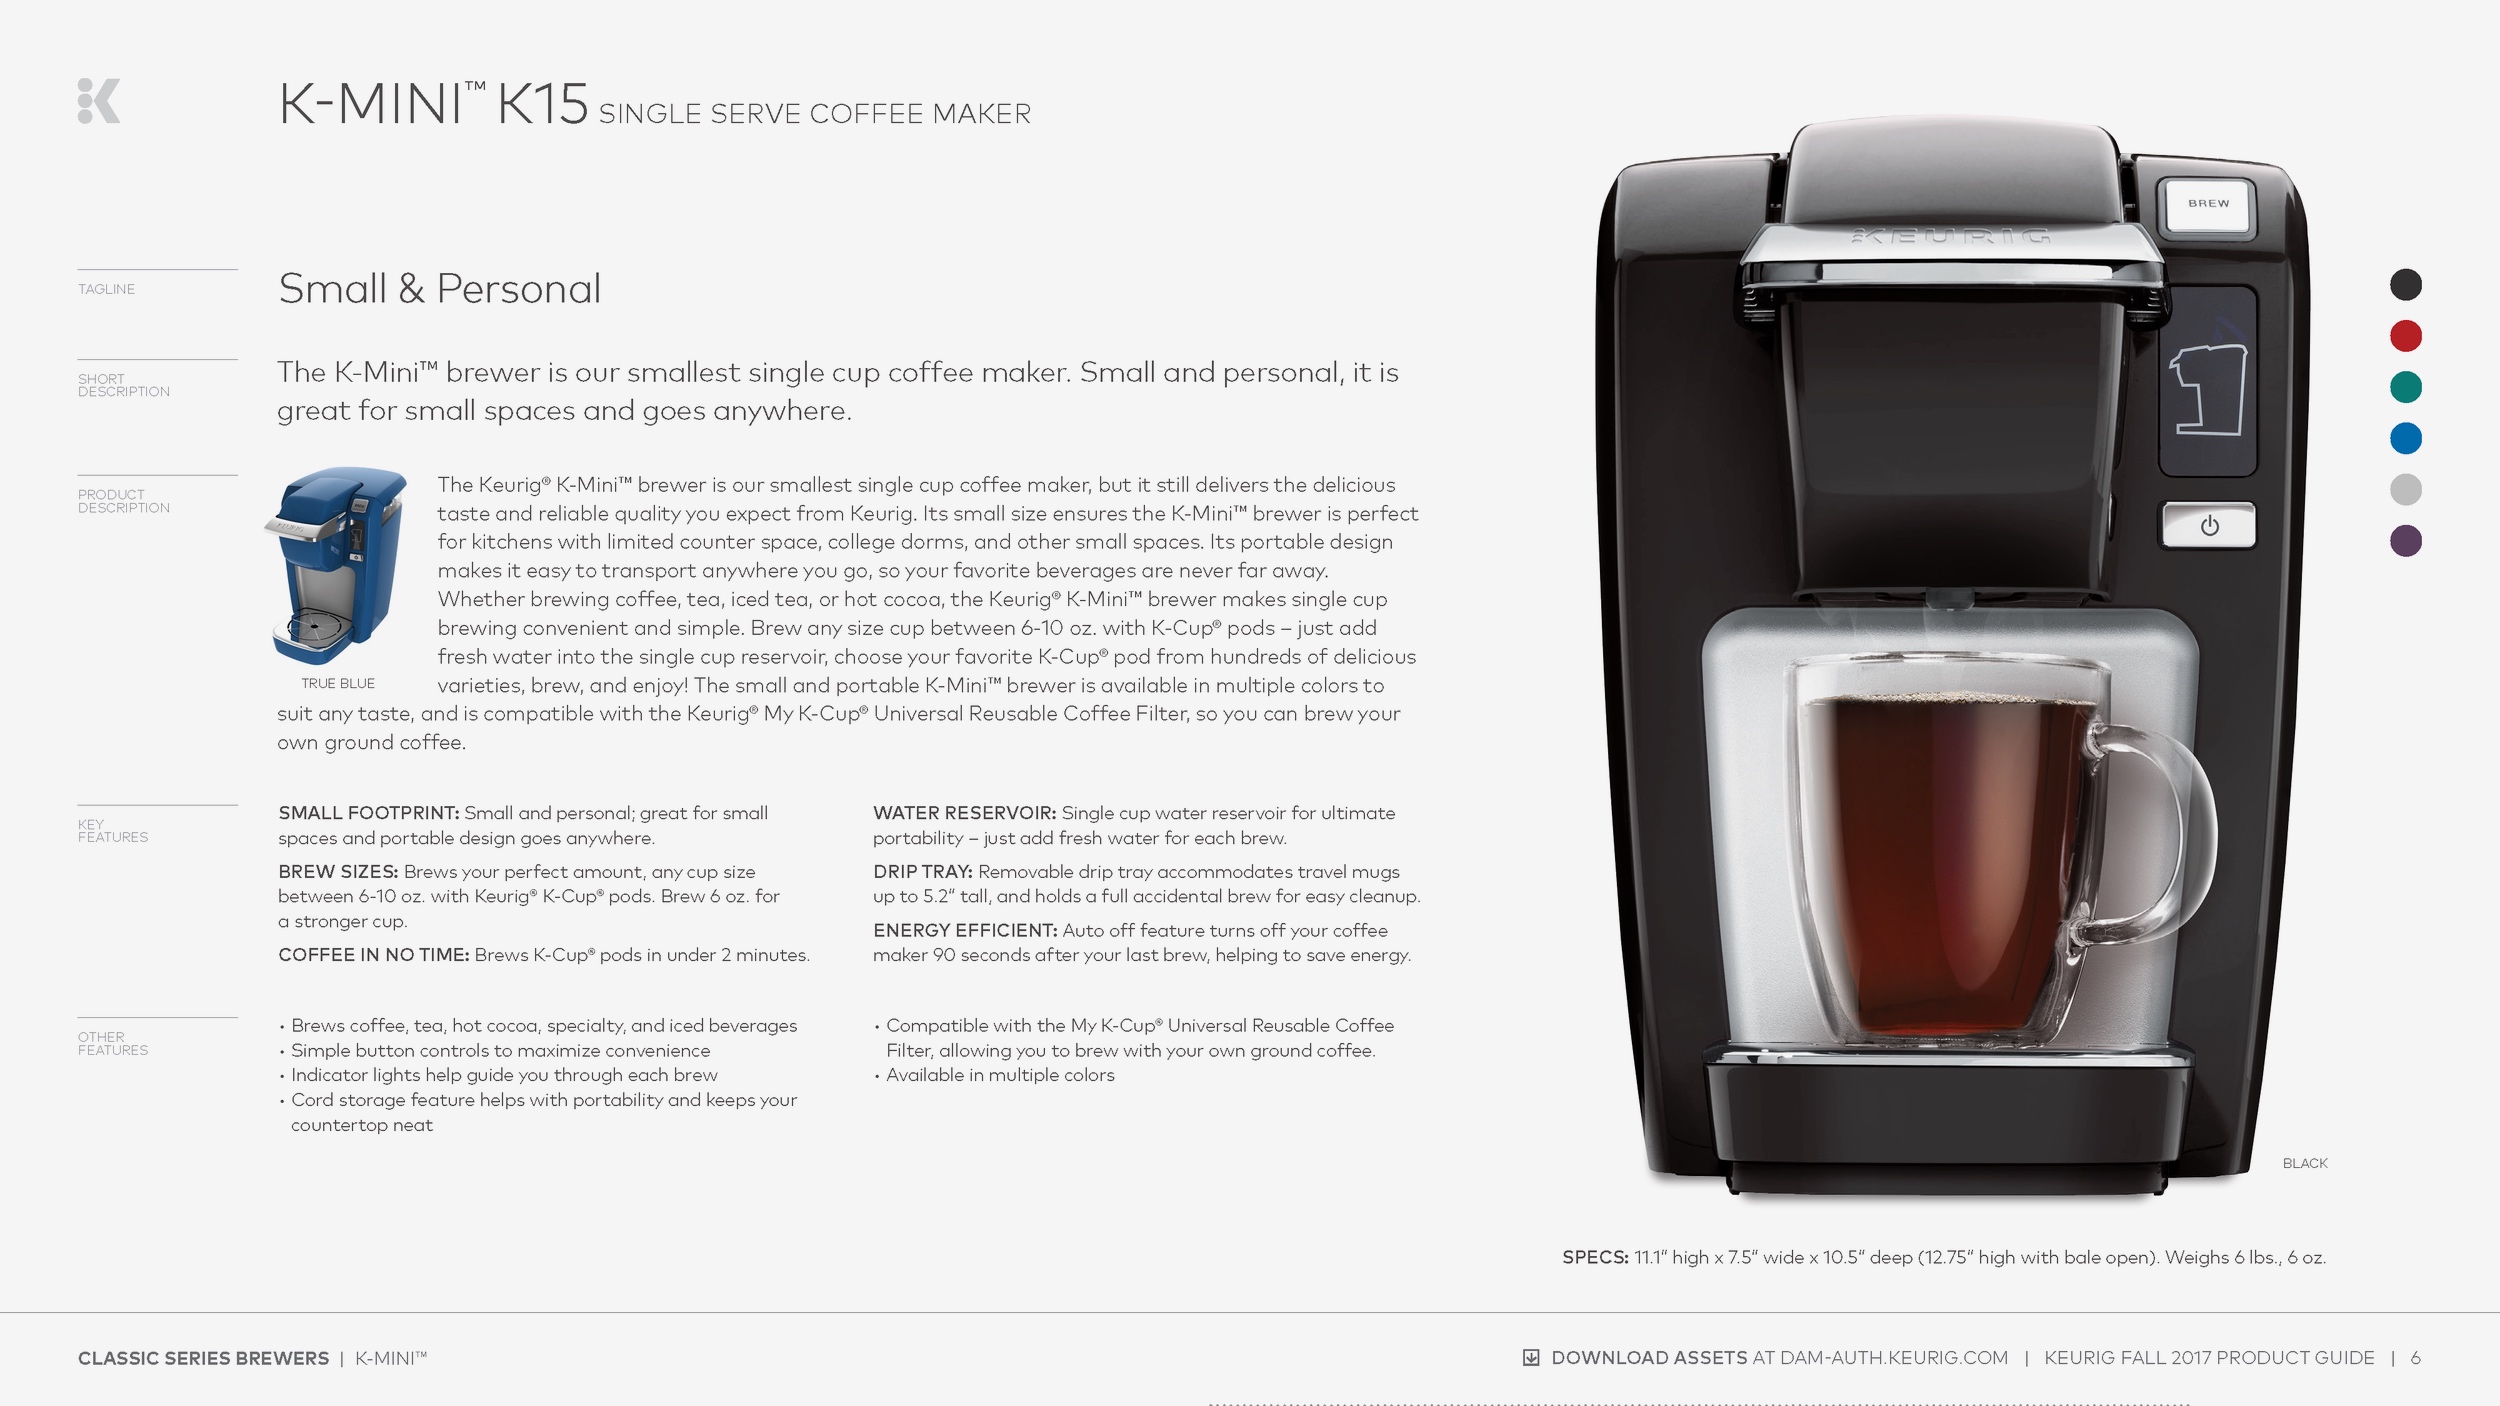 keurig_product_guide_F17_R8_Page_06.png